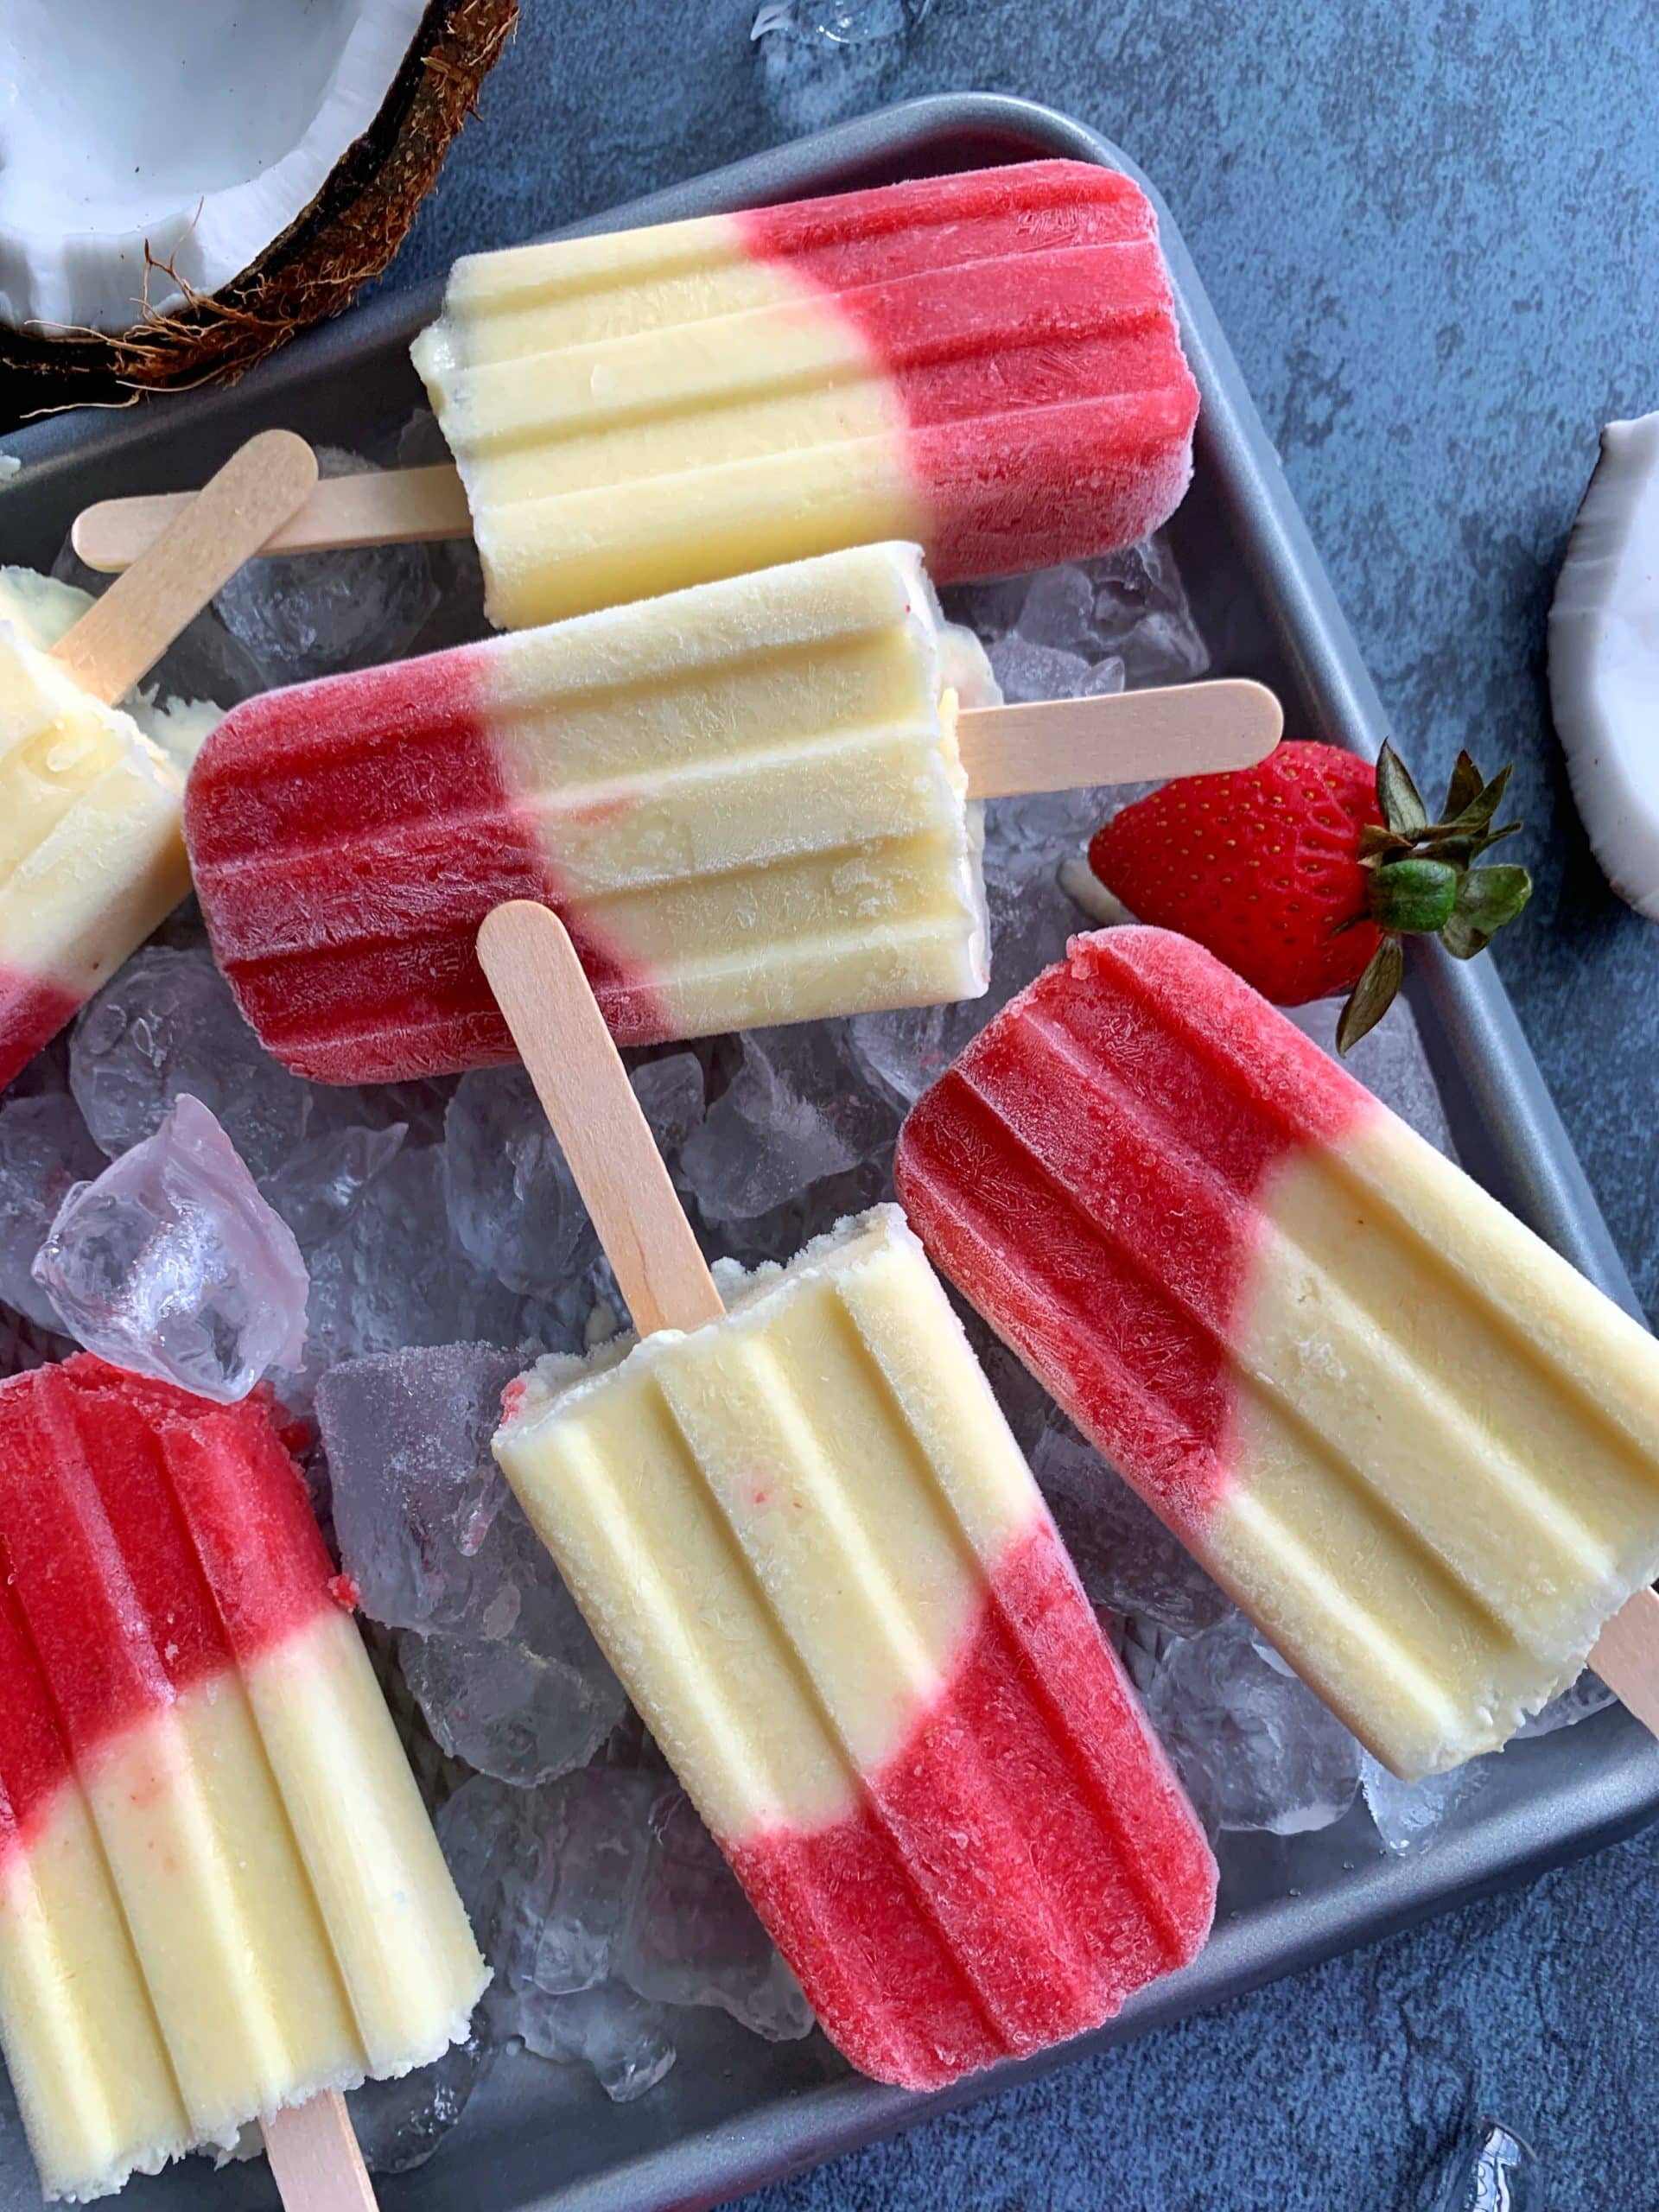 A tray of homemade Miami Vice Popsicles on a bed of ice with coconut halves and strawberries on the side.